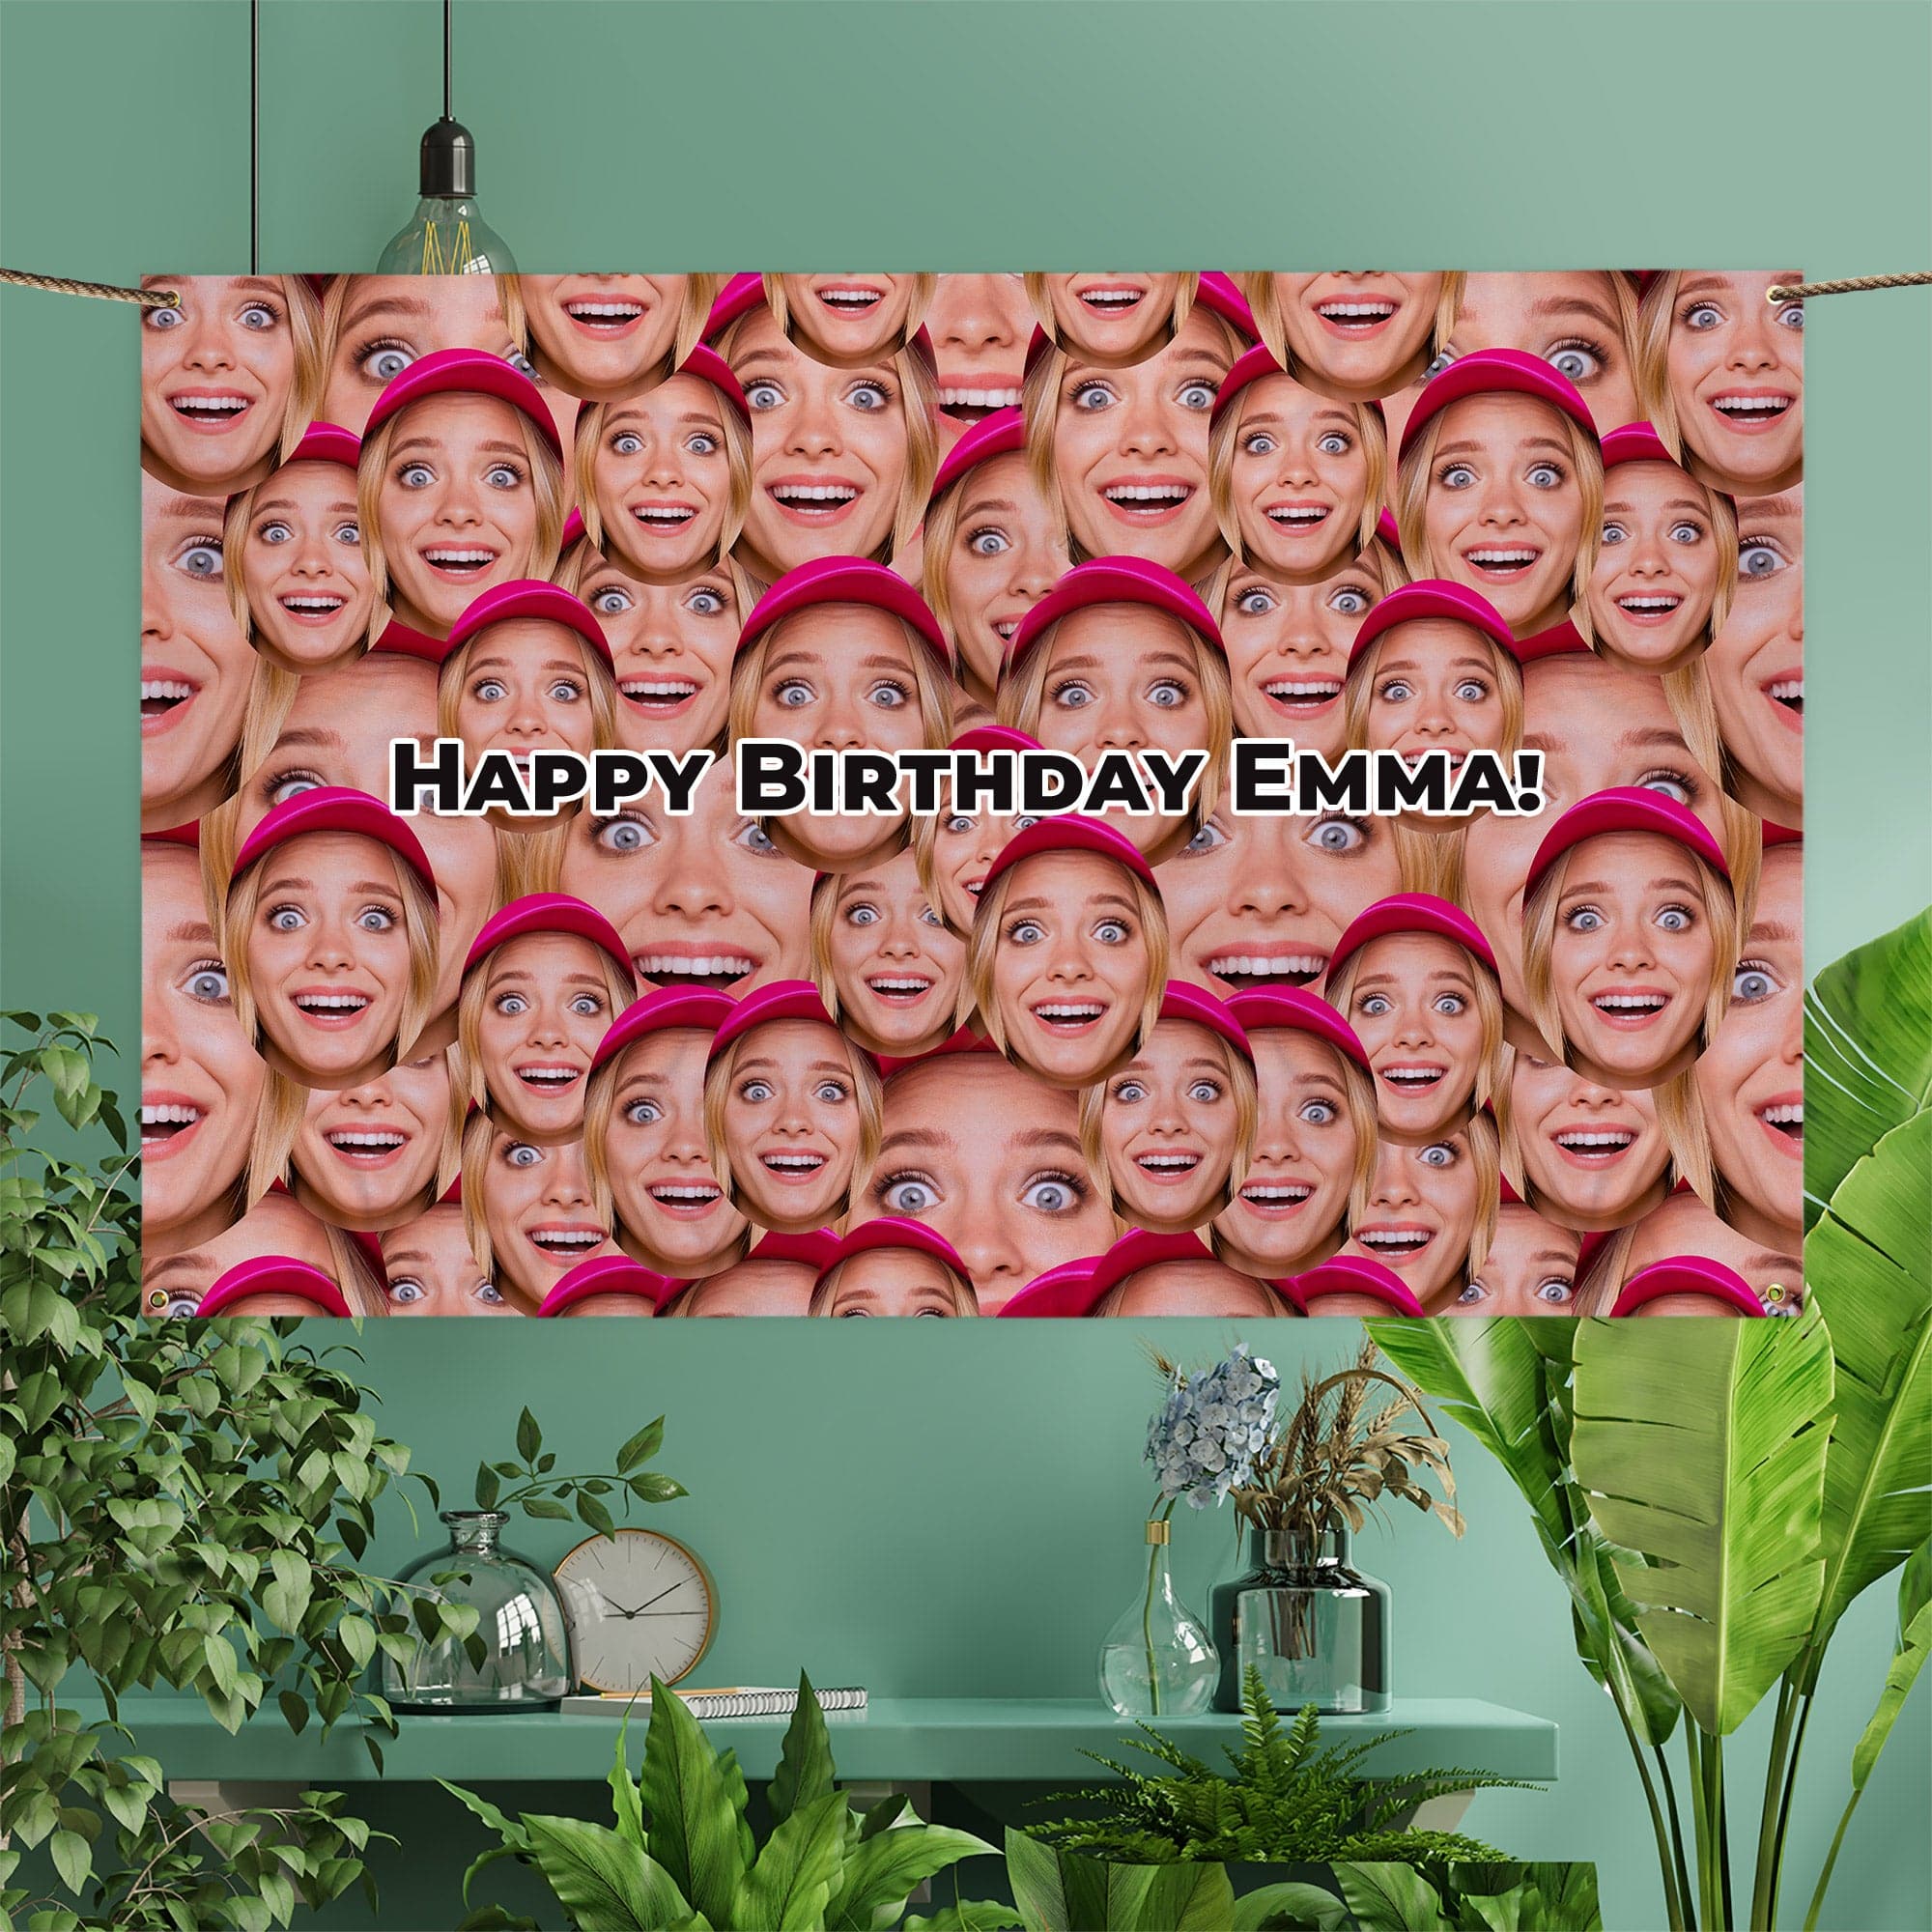 Personalised Text - Face All Over Banner - 5ft x 3ft